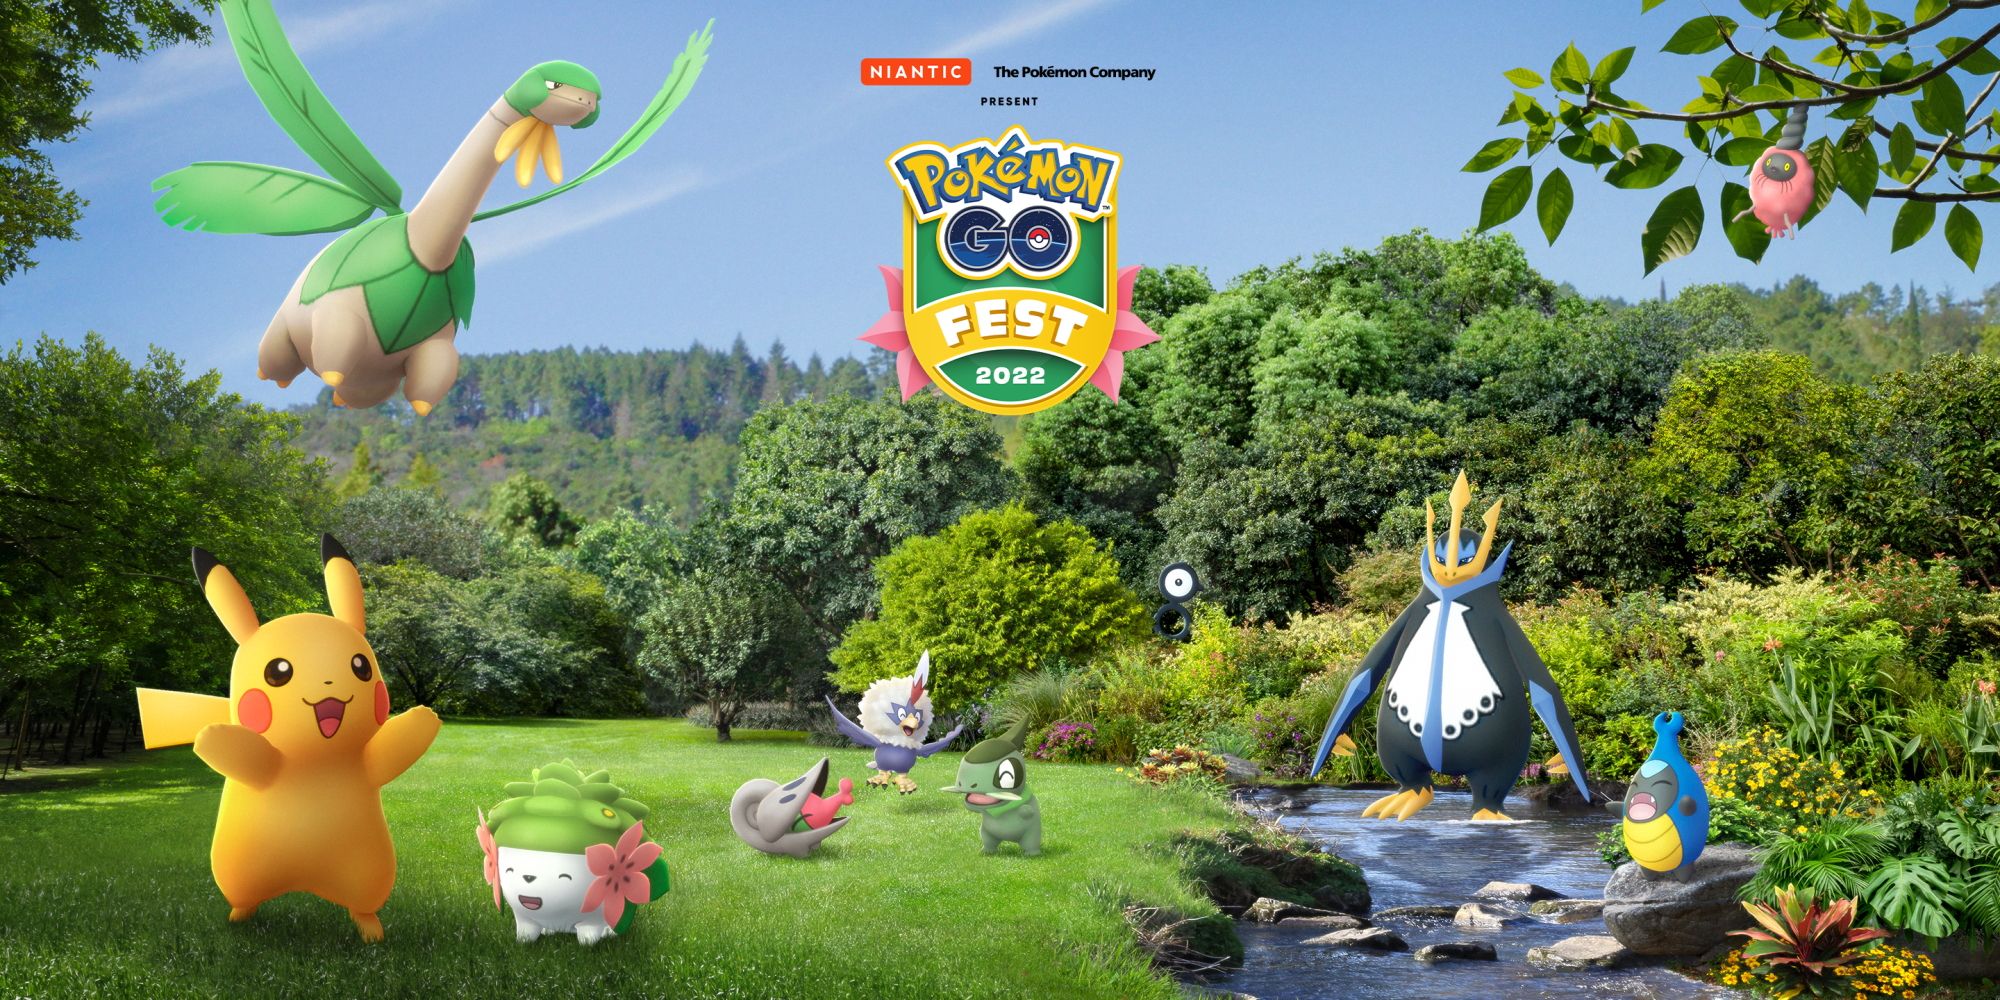 Pokemon Go Fest Image with several event in a field with a small stream